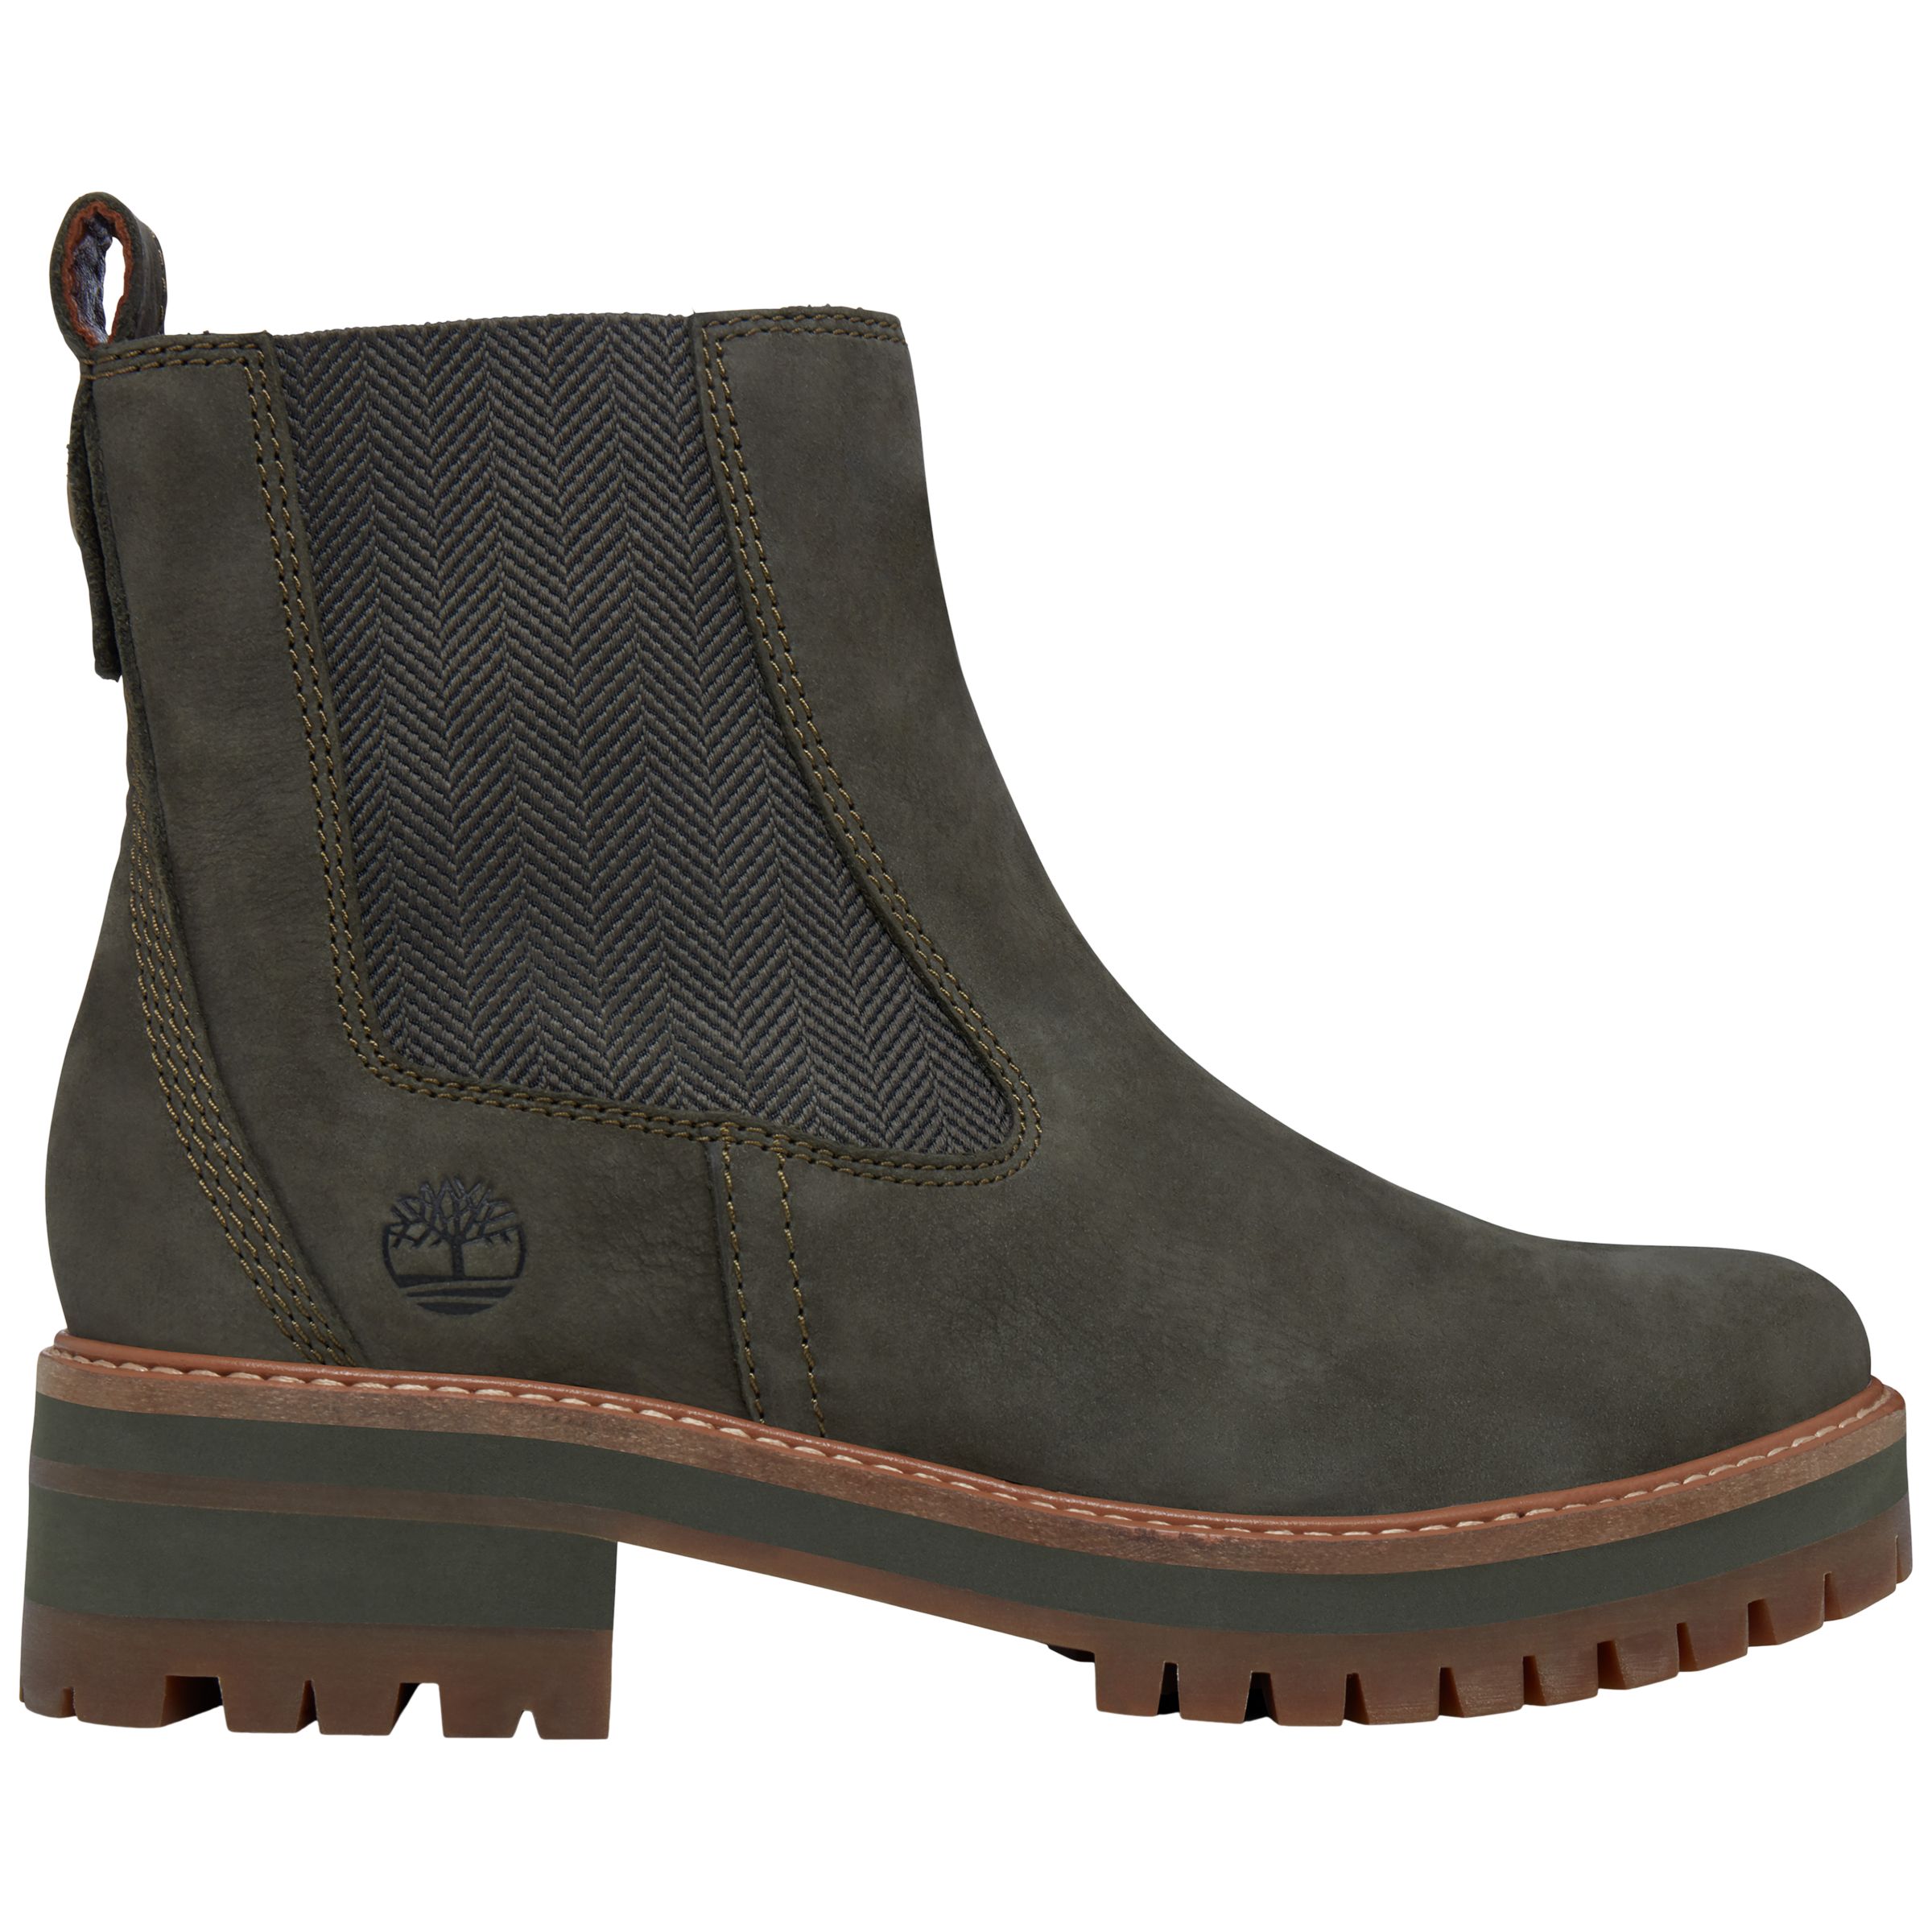 Timberland Courmayeur Valley Chelsea Boots, Olive